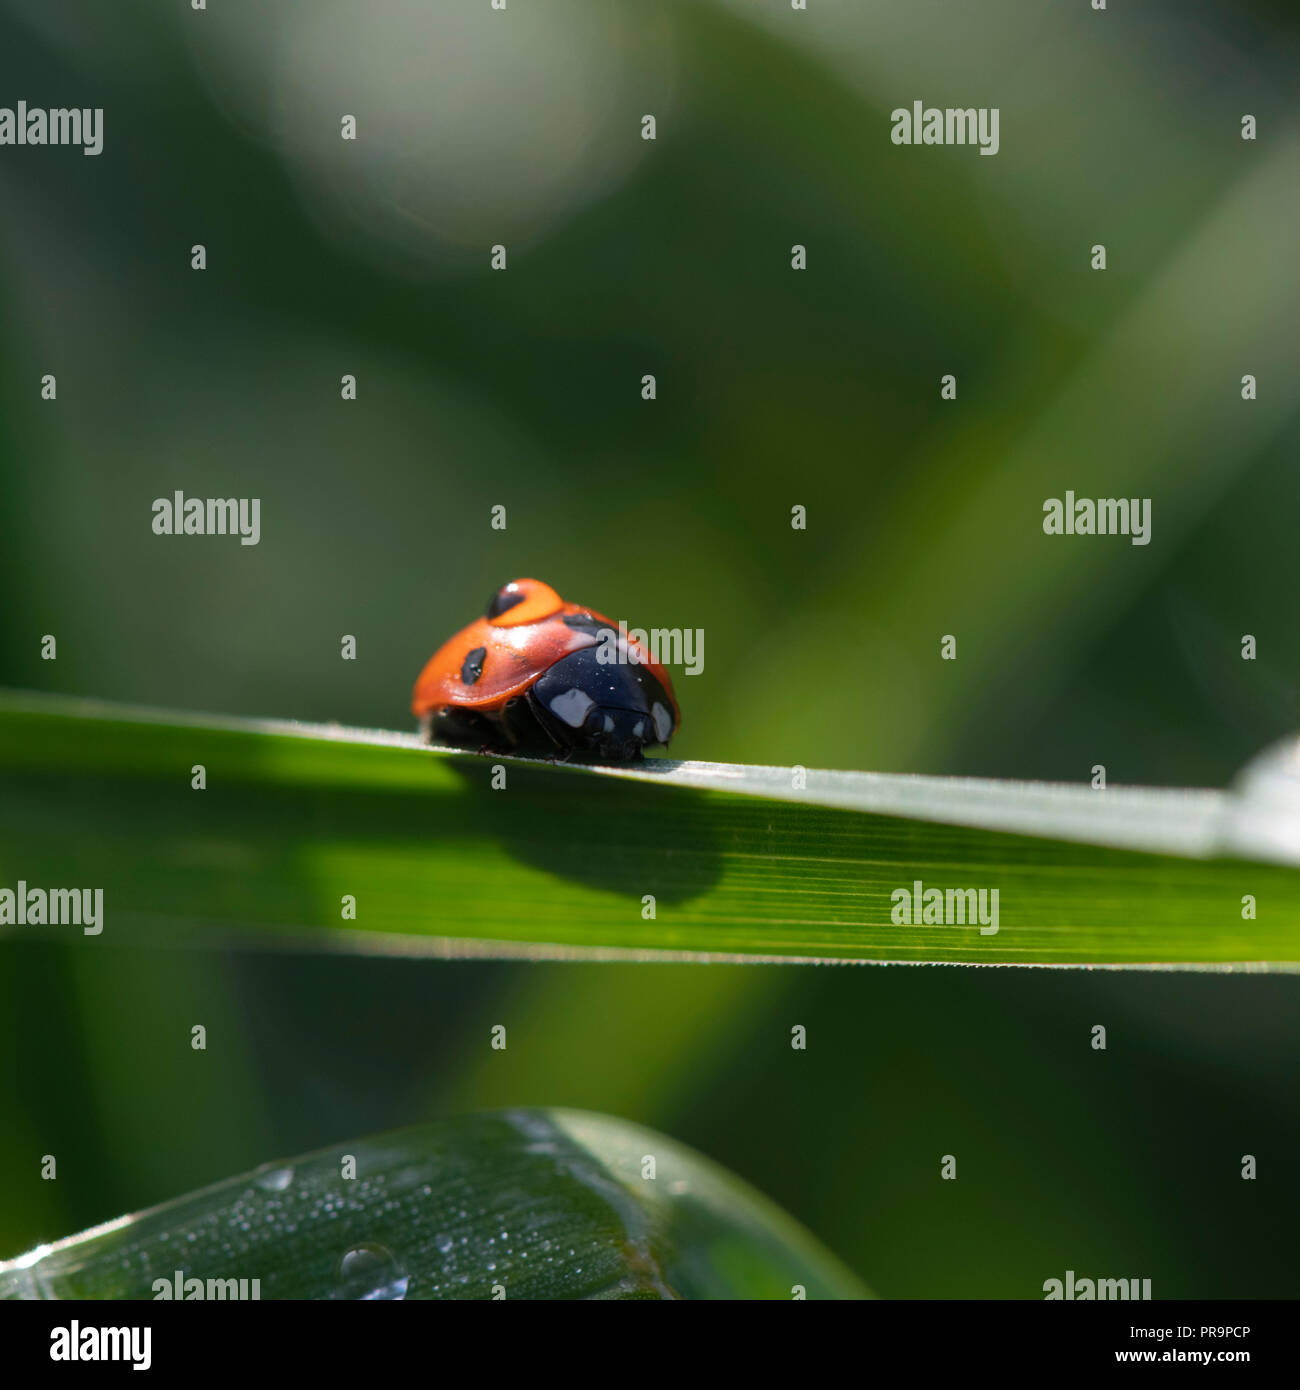 A Dewdrop Sits on a Ladybird Which in Turn Balances on a Blade of Grass Stock Photo